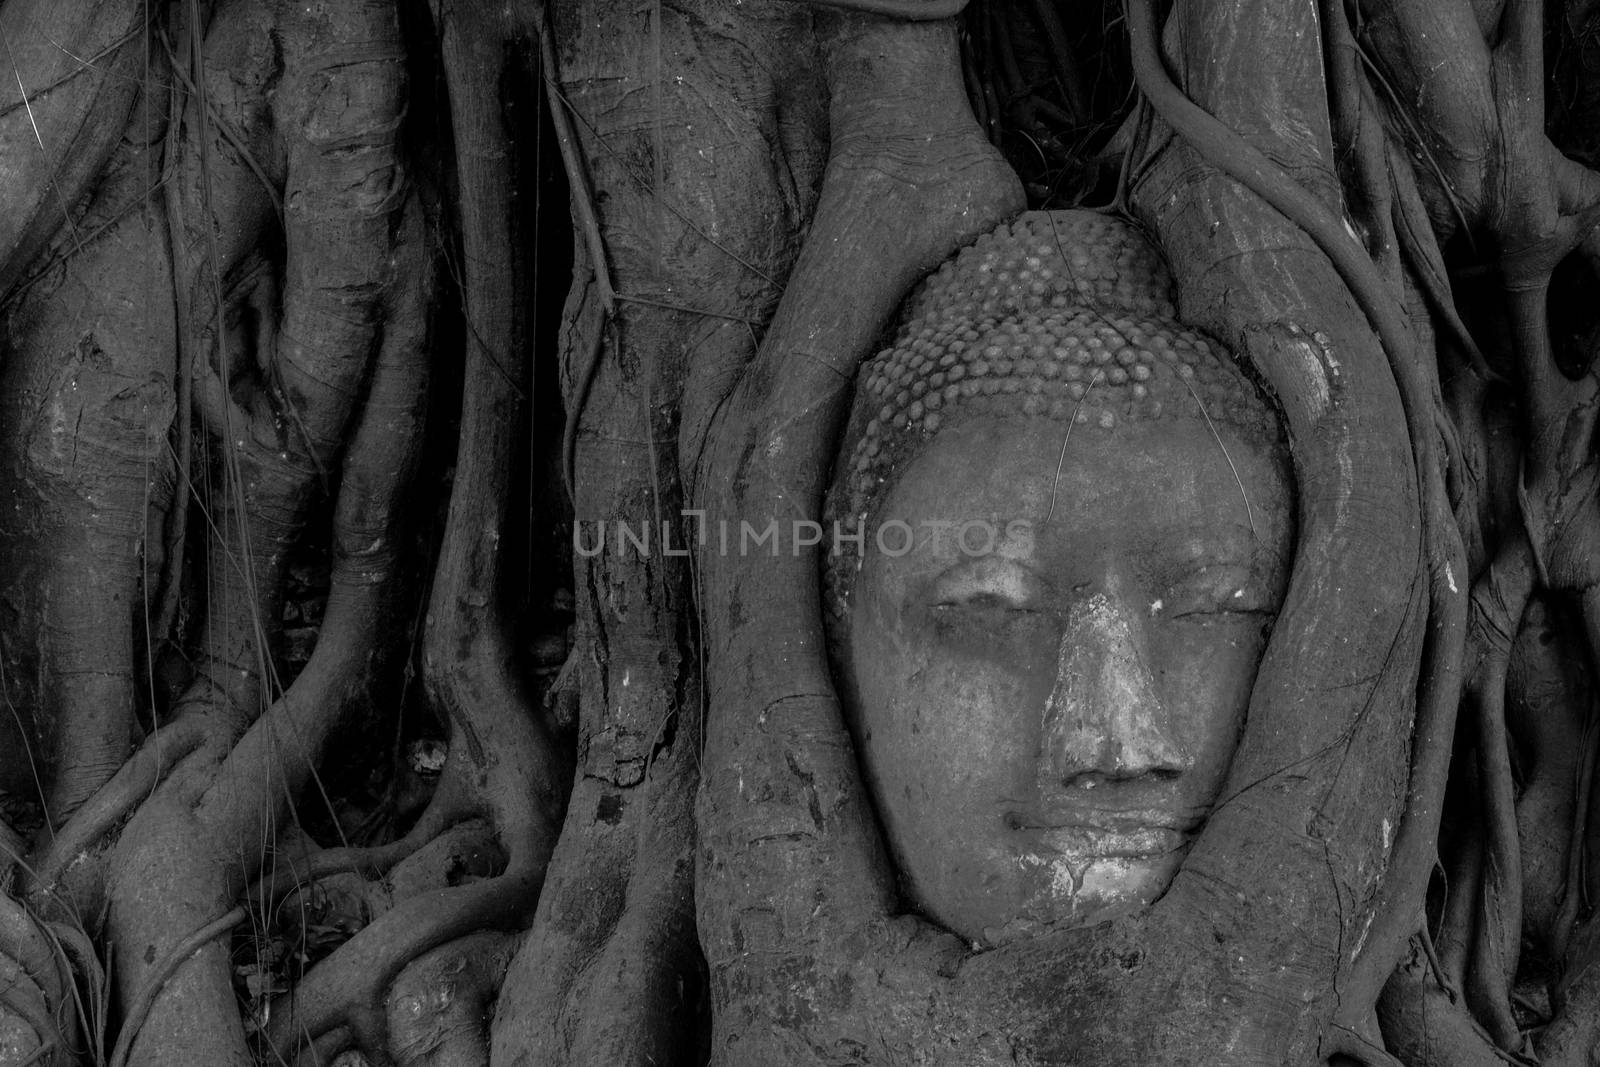 The Head of sandstone Buddha in tree roots at Wat Mahathat, Ayut by a3701027